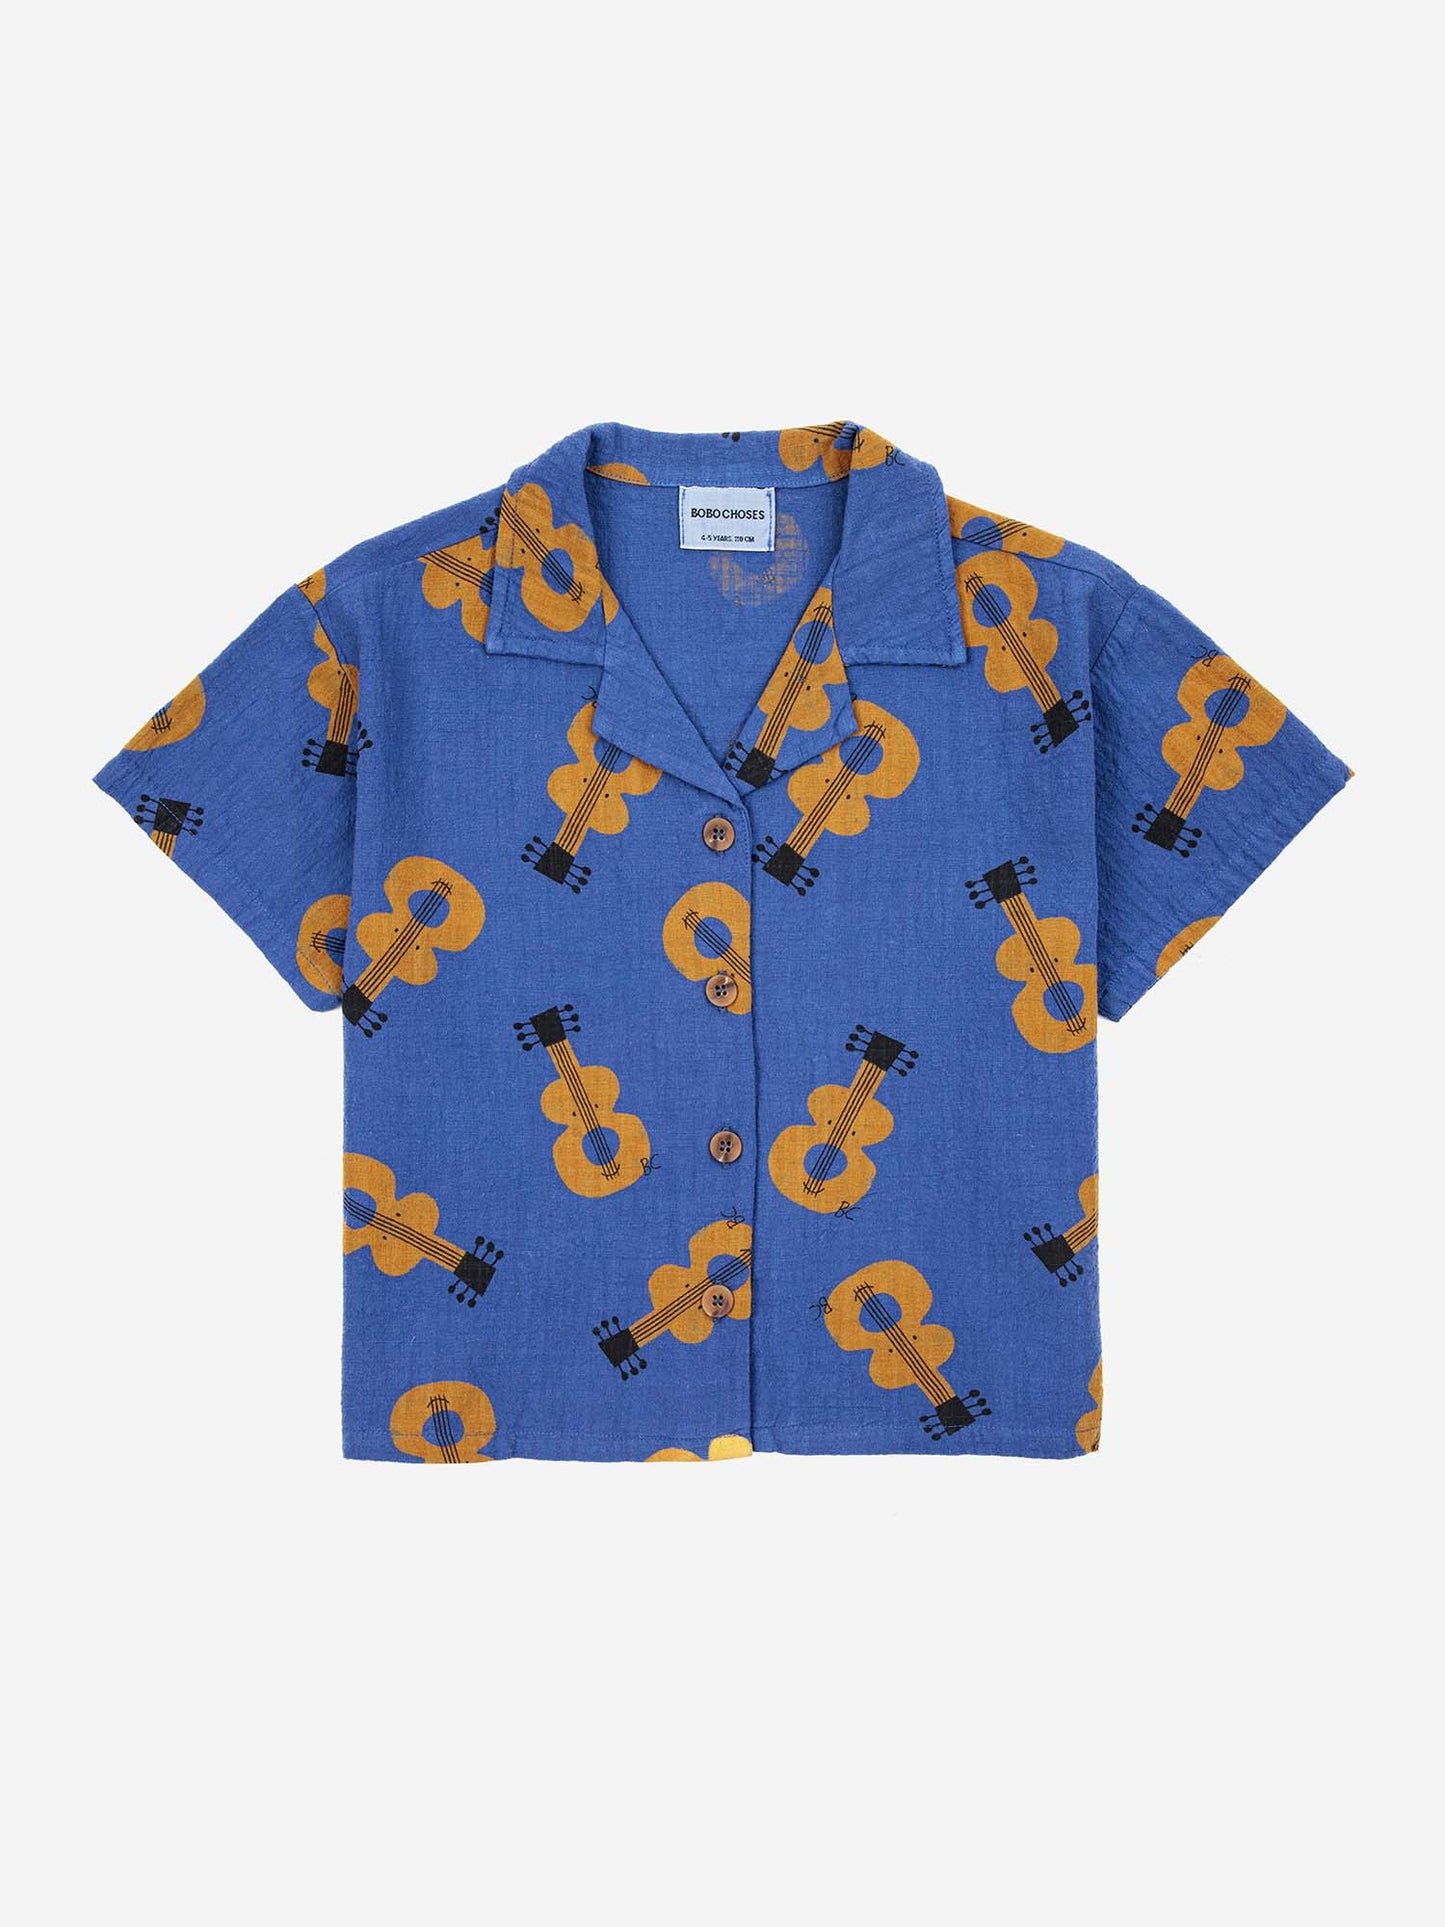 Acoustic Guitar All Over Woven Shirt